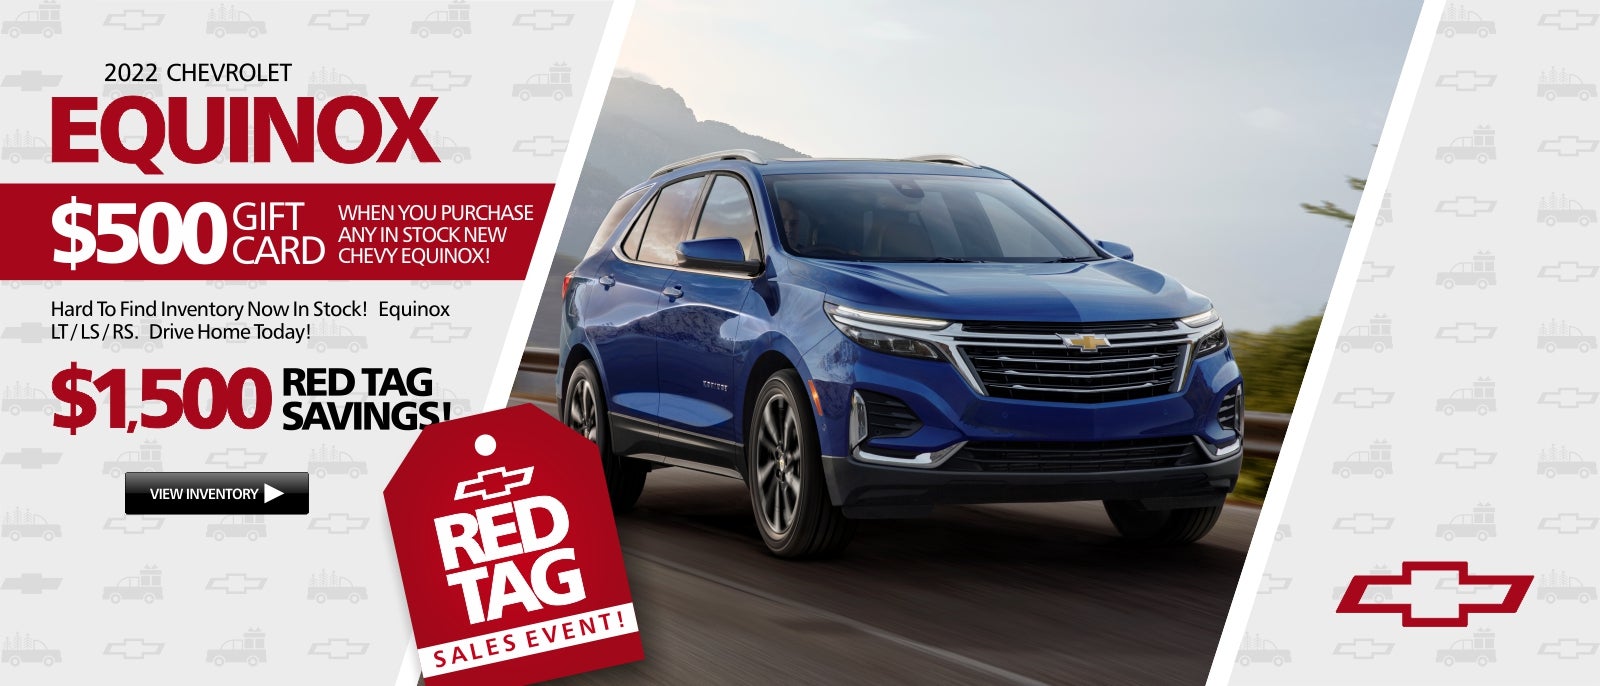 2022 Chevrolet Equinox Red Tag Sales Event